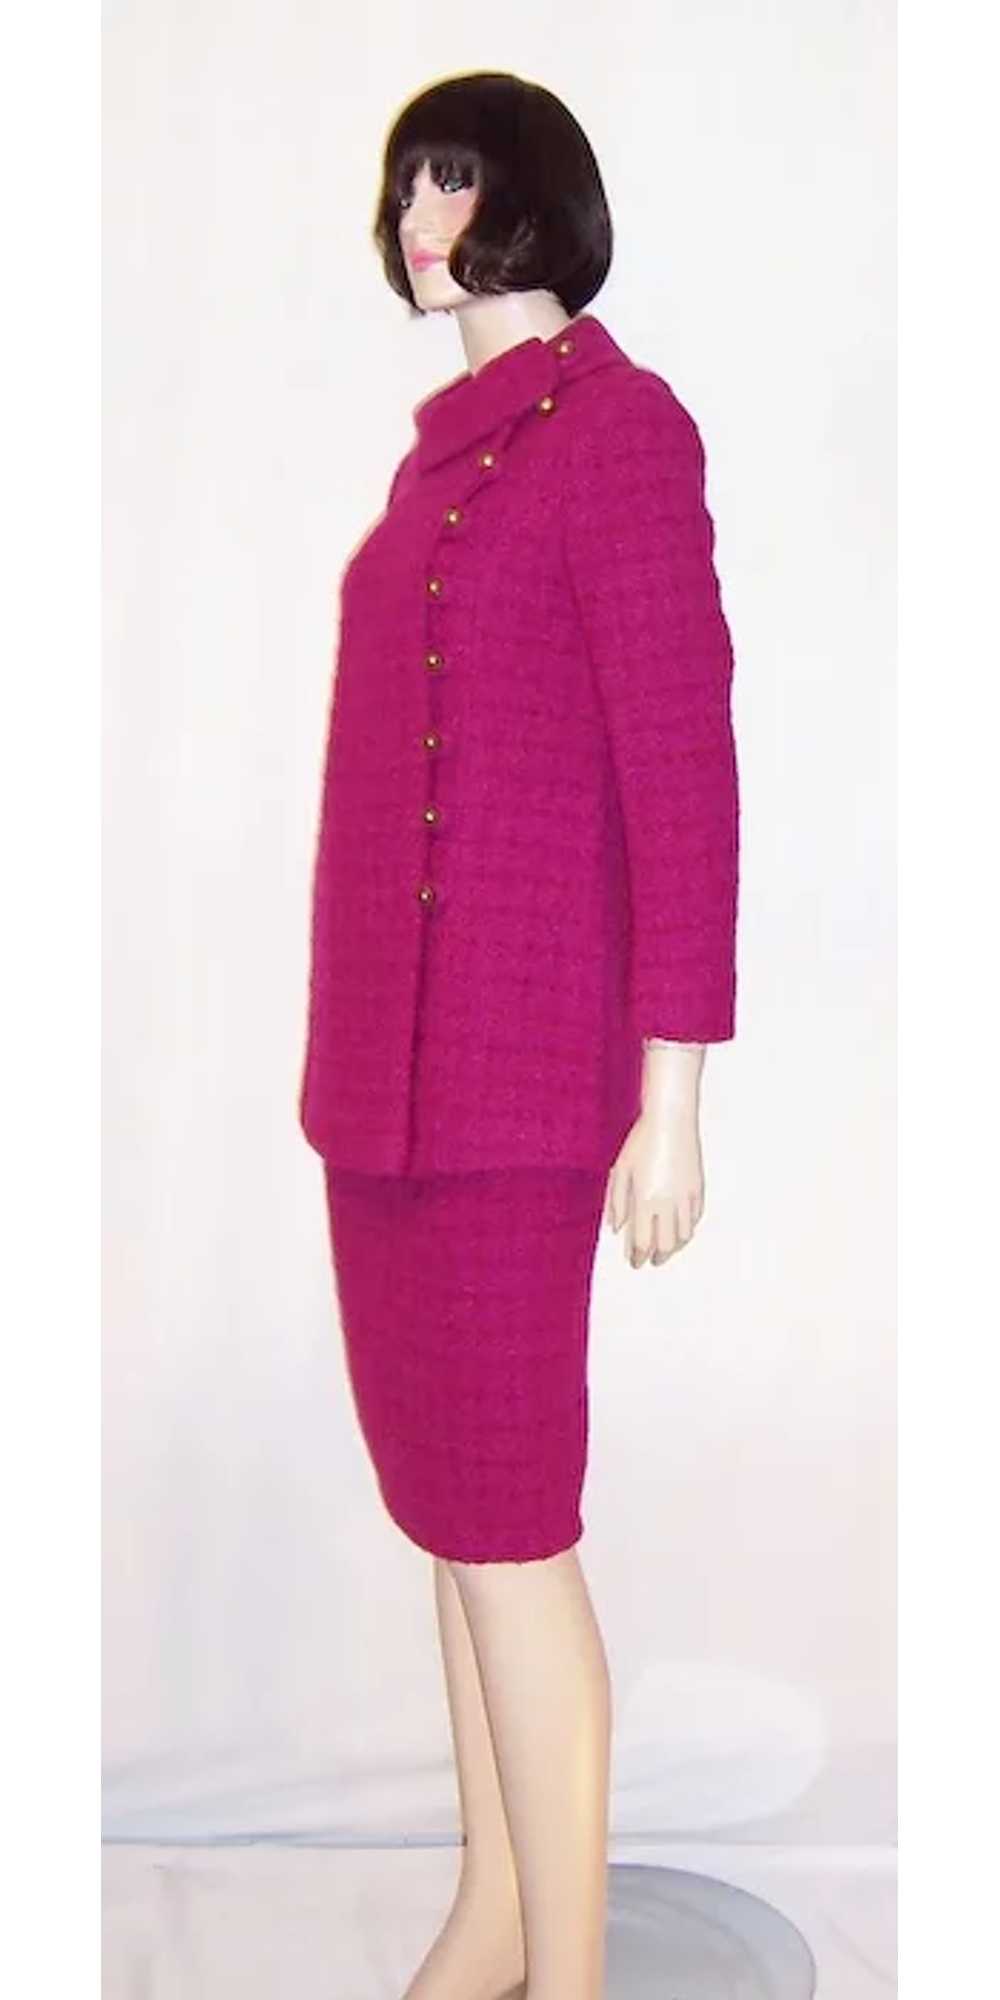 Stylish & Gorgeous Red Raspberry Nubby Woolen Suit - image 2